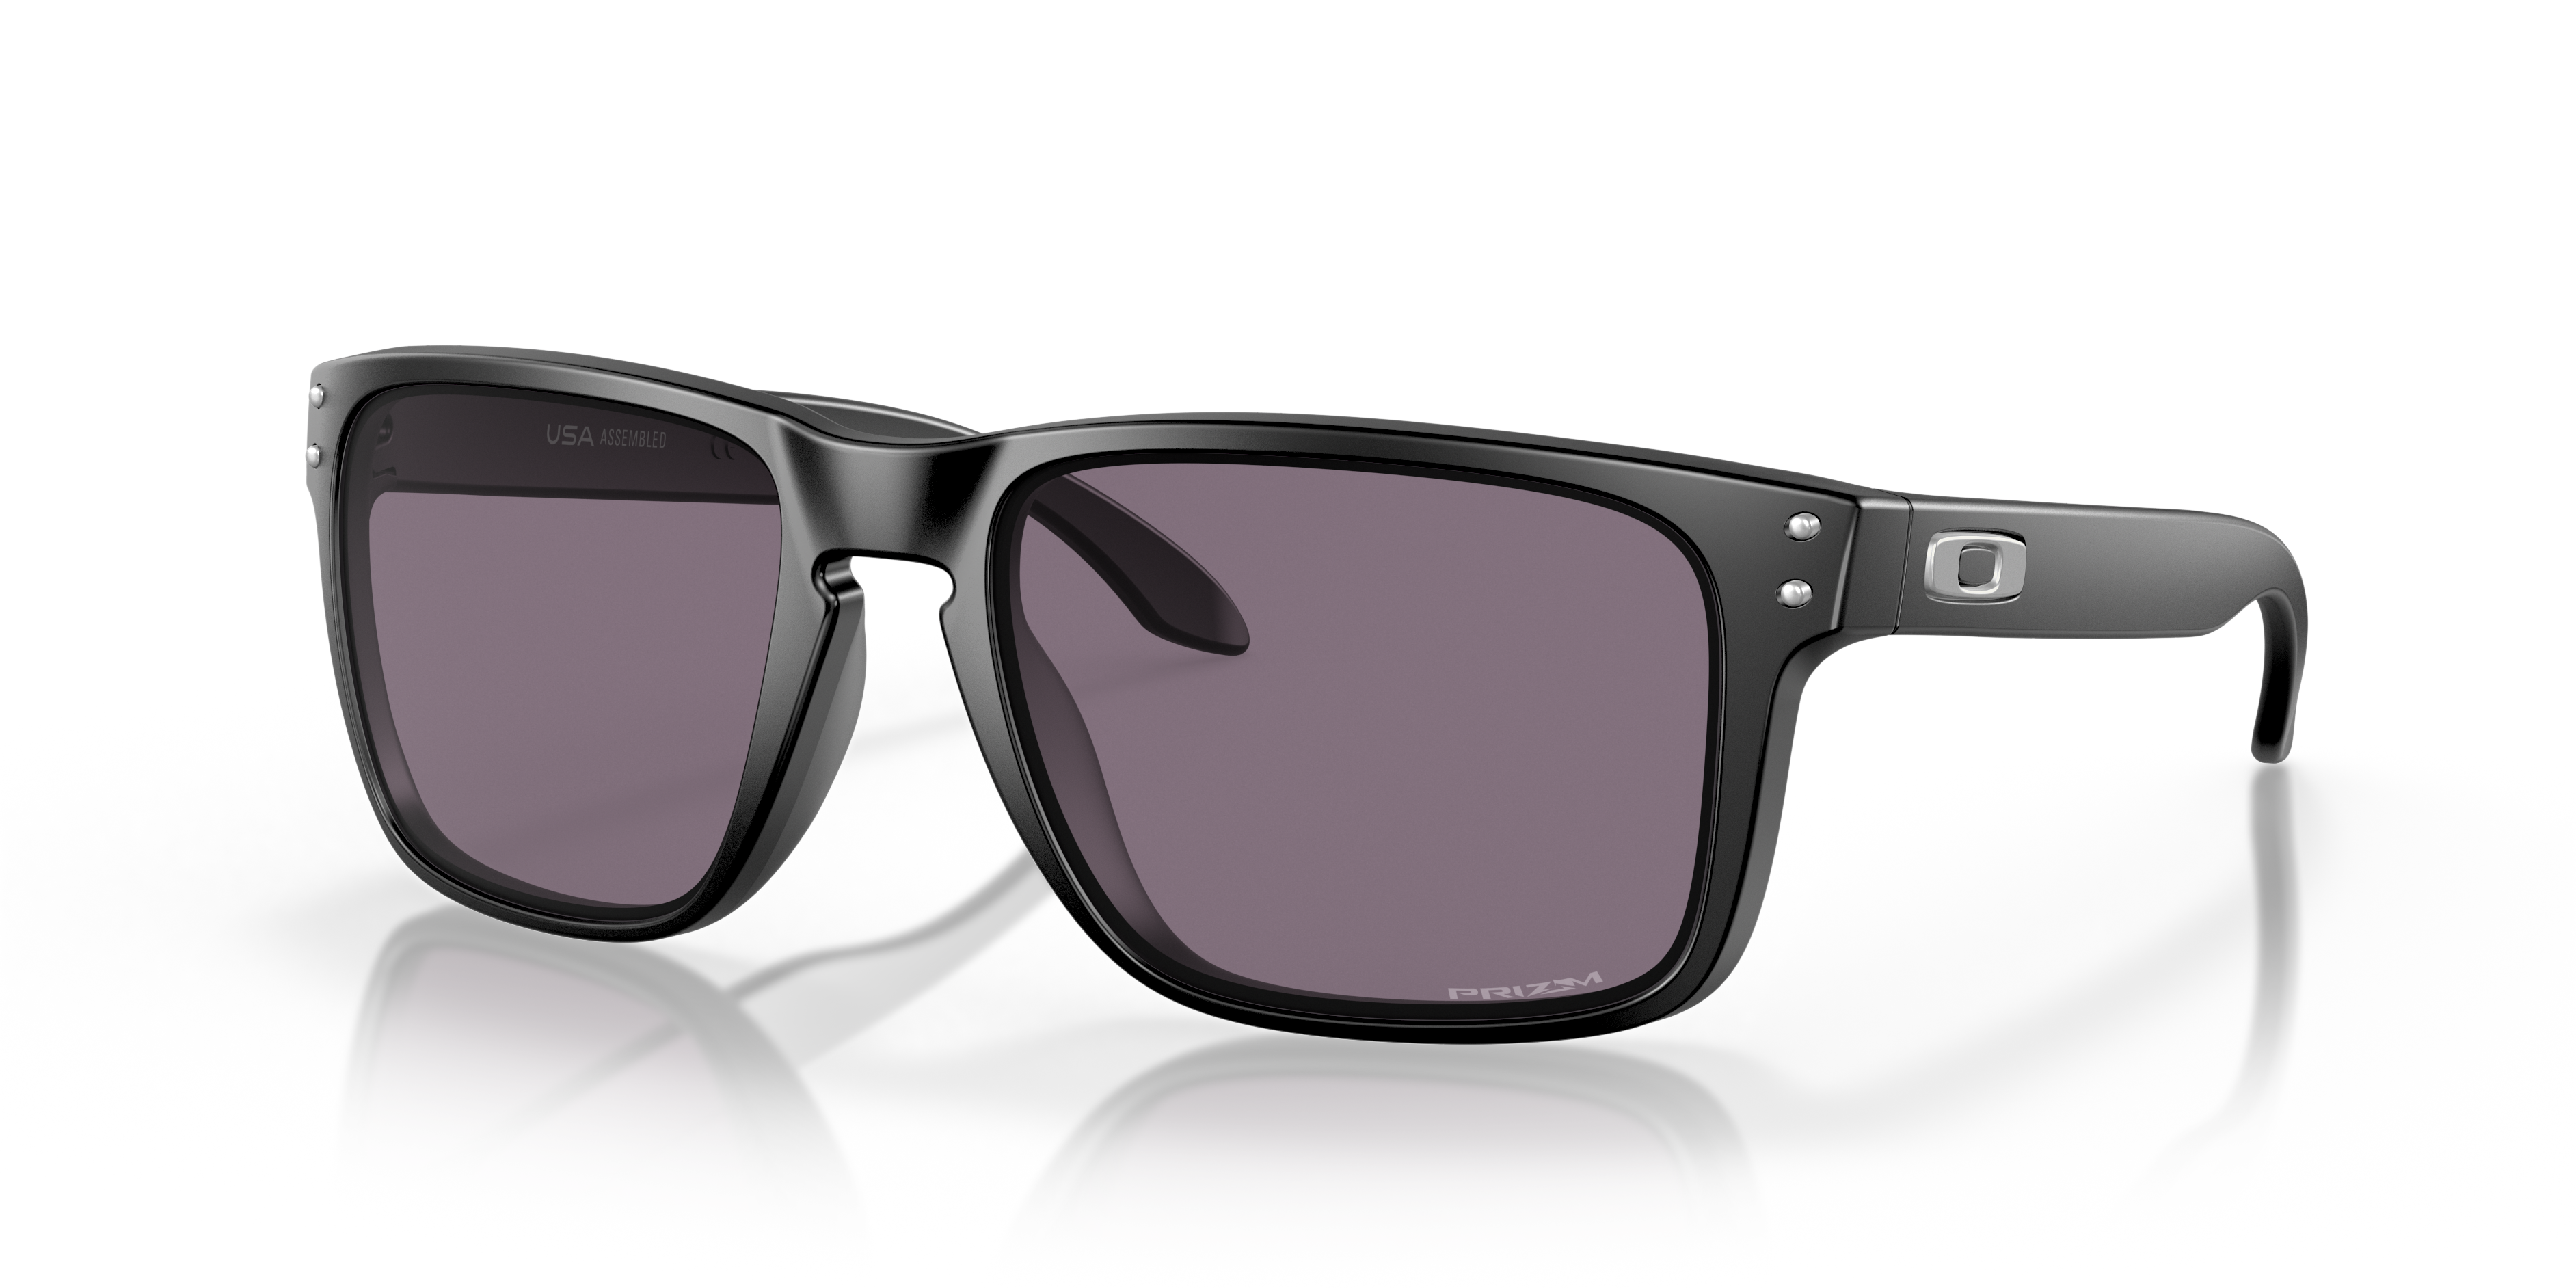 Sunglass Hut Return Policy and Exchanges: What You Need to Know